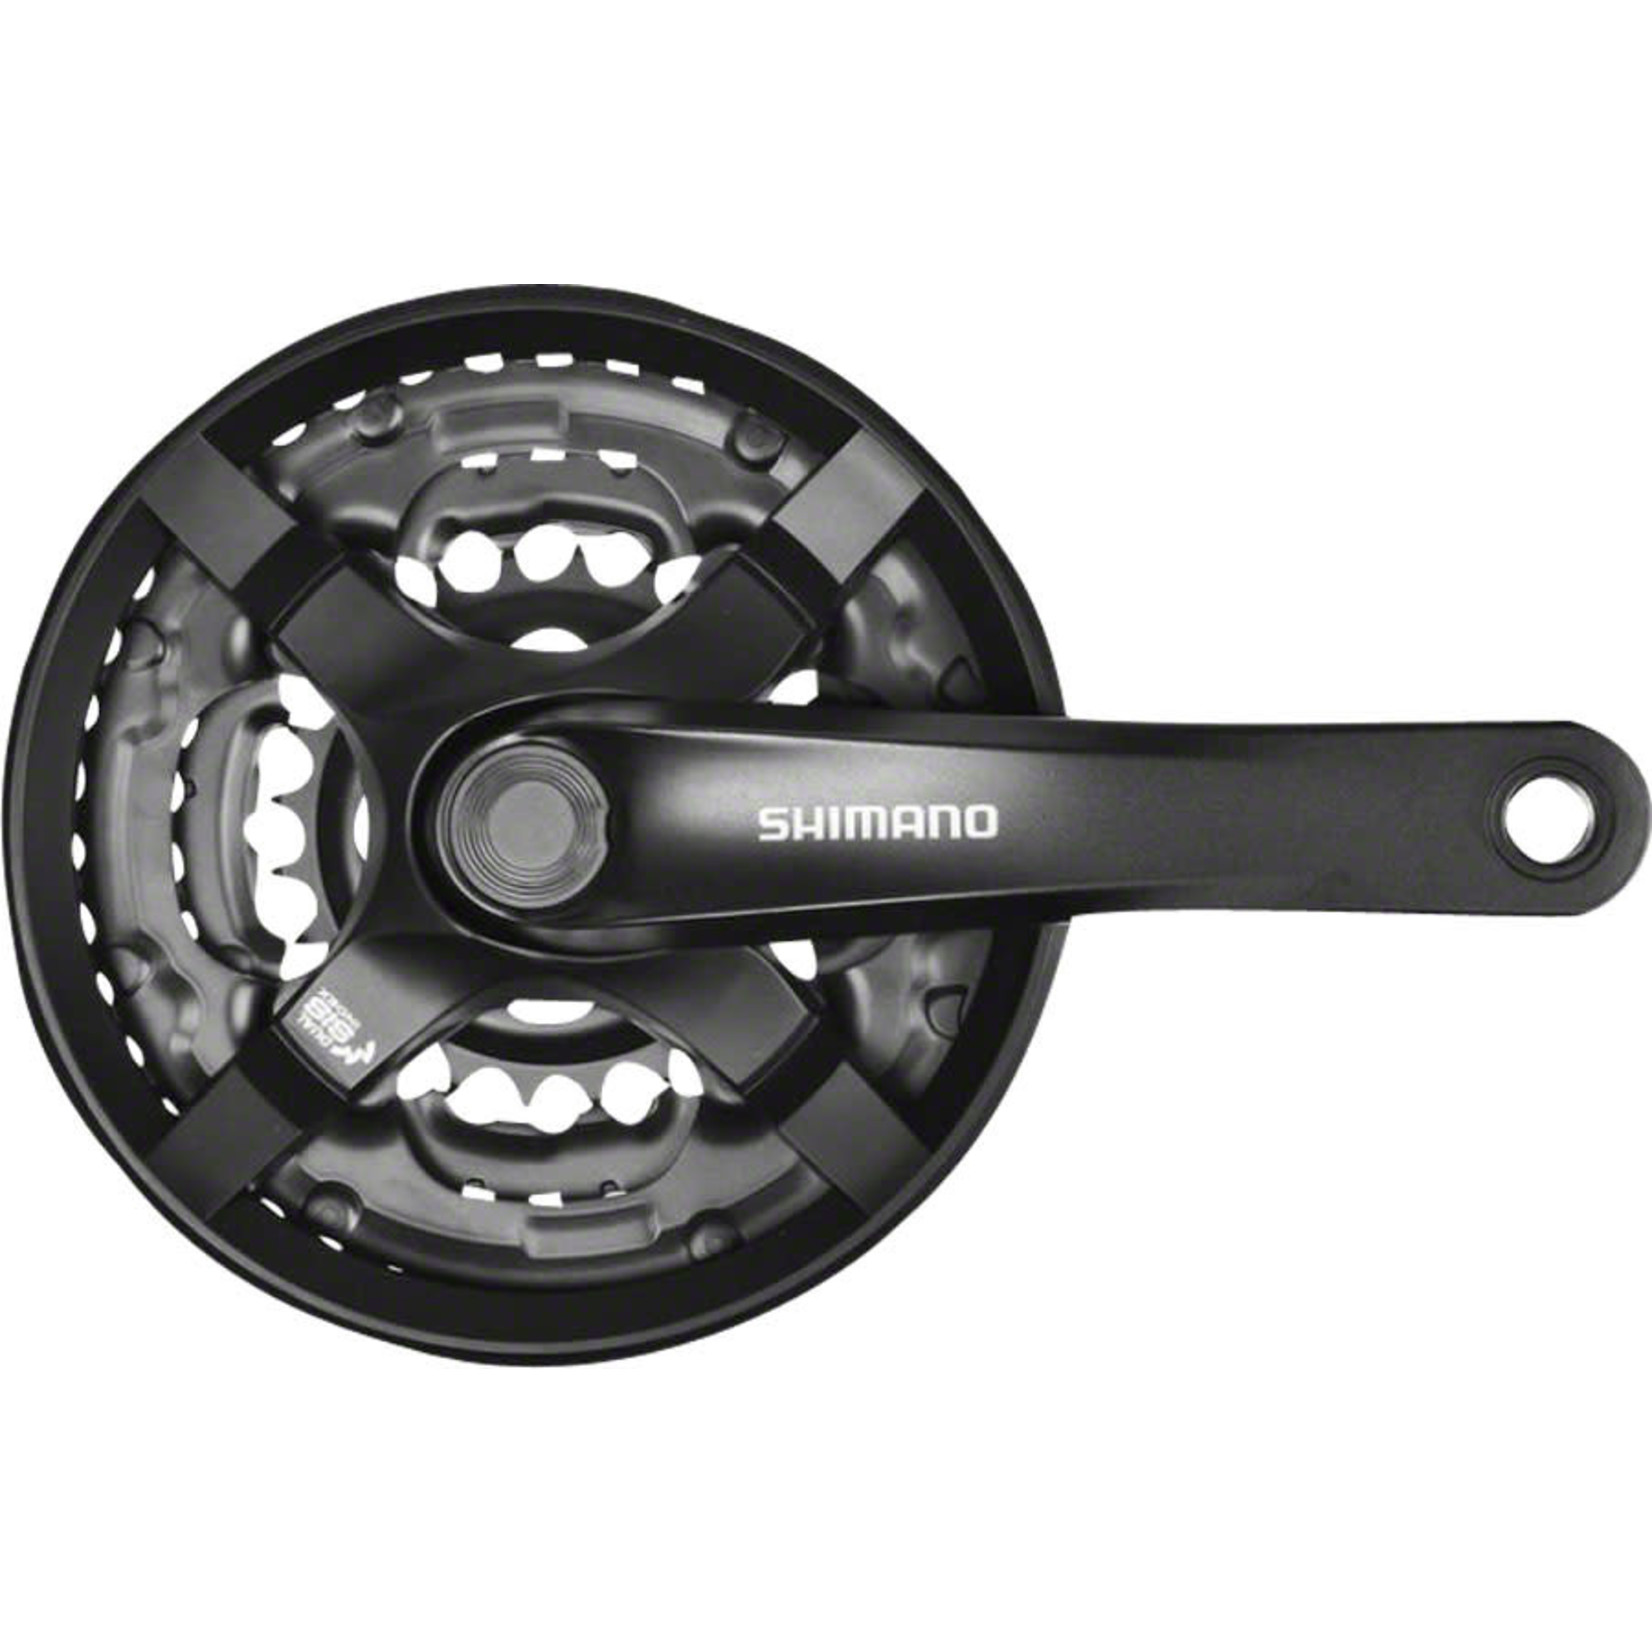 Ochtend Munching Alternatief voorstel Shimano Tourney FC-TY501 Crankset - 175mm, 6/7/8-Speed, 42/34/24t, Riveted,  Square Taper JIS Spindle Interface, Black - Esquina Bicycle Shop